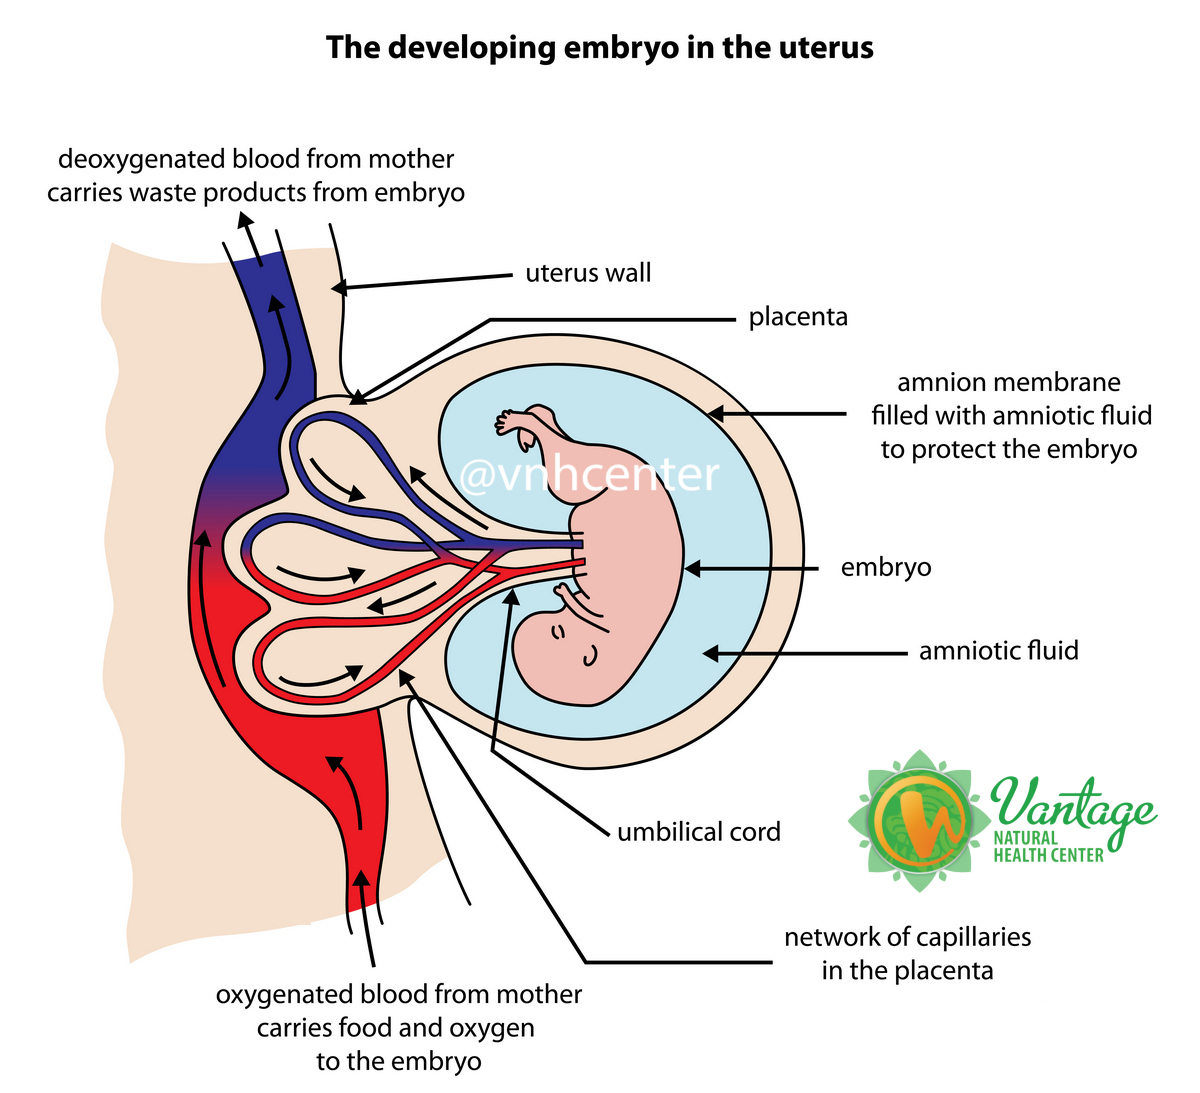 the developing embryo in the uterus